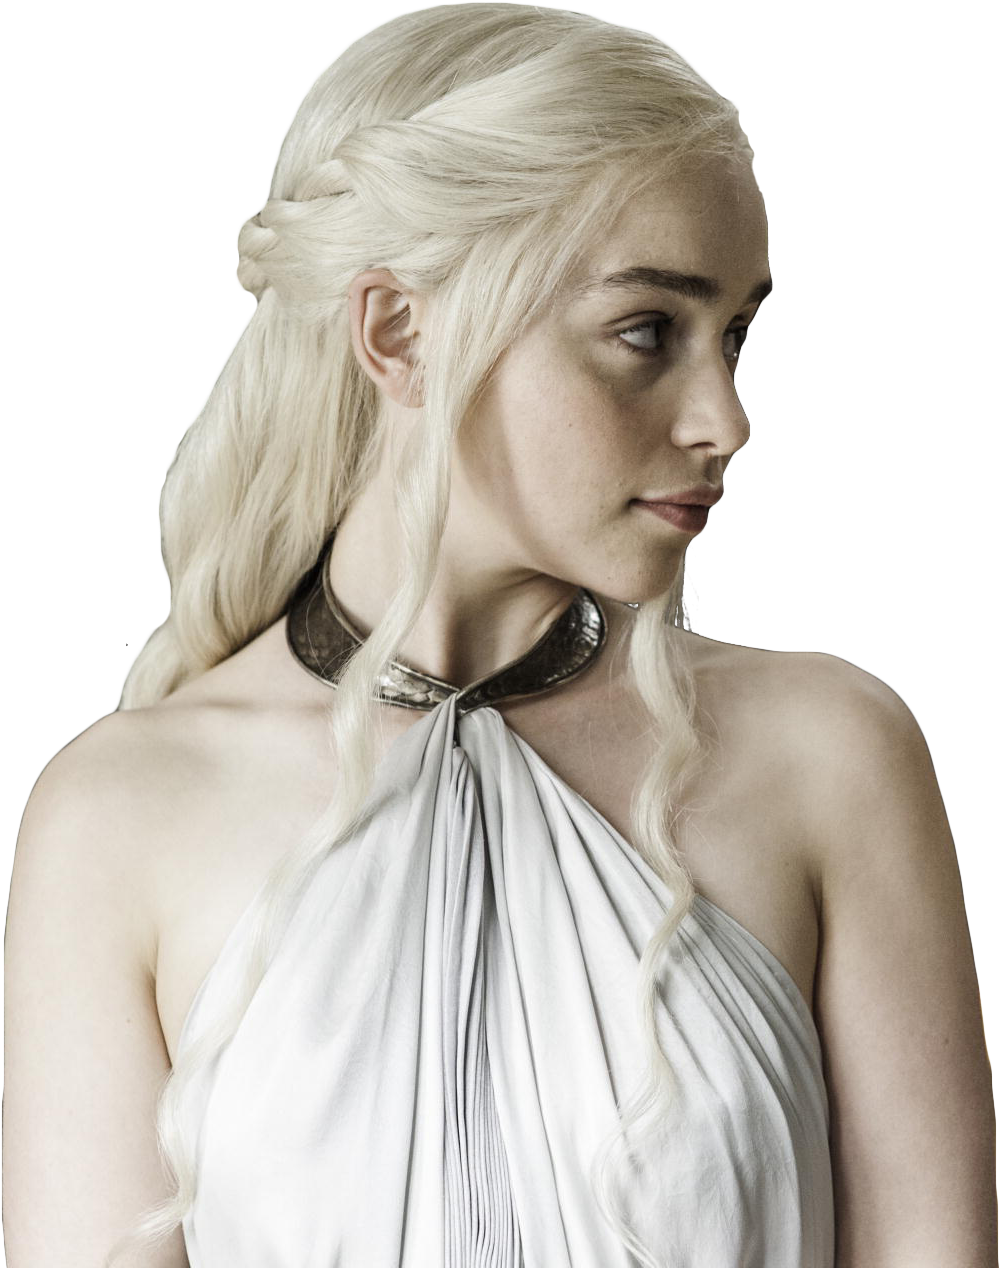 Emilia Clarke Games of Thrones PNG Clipart Background